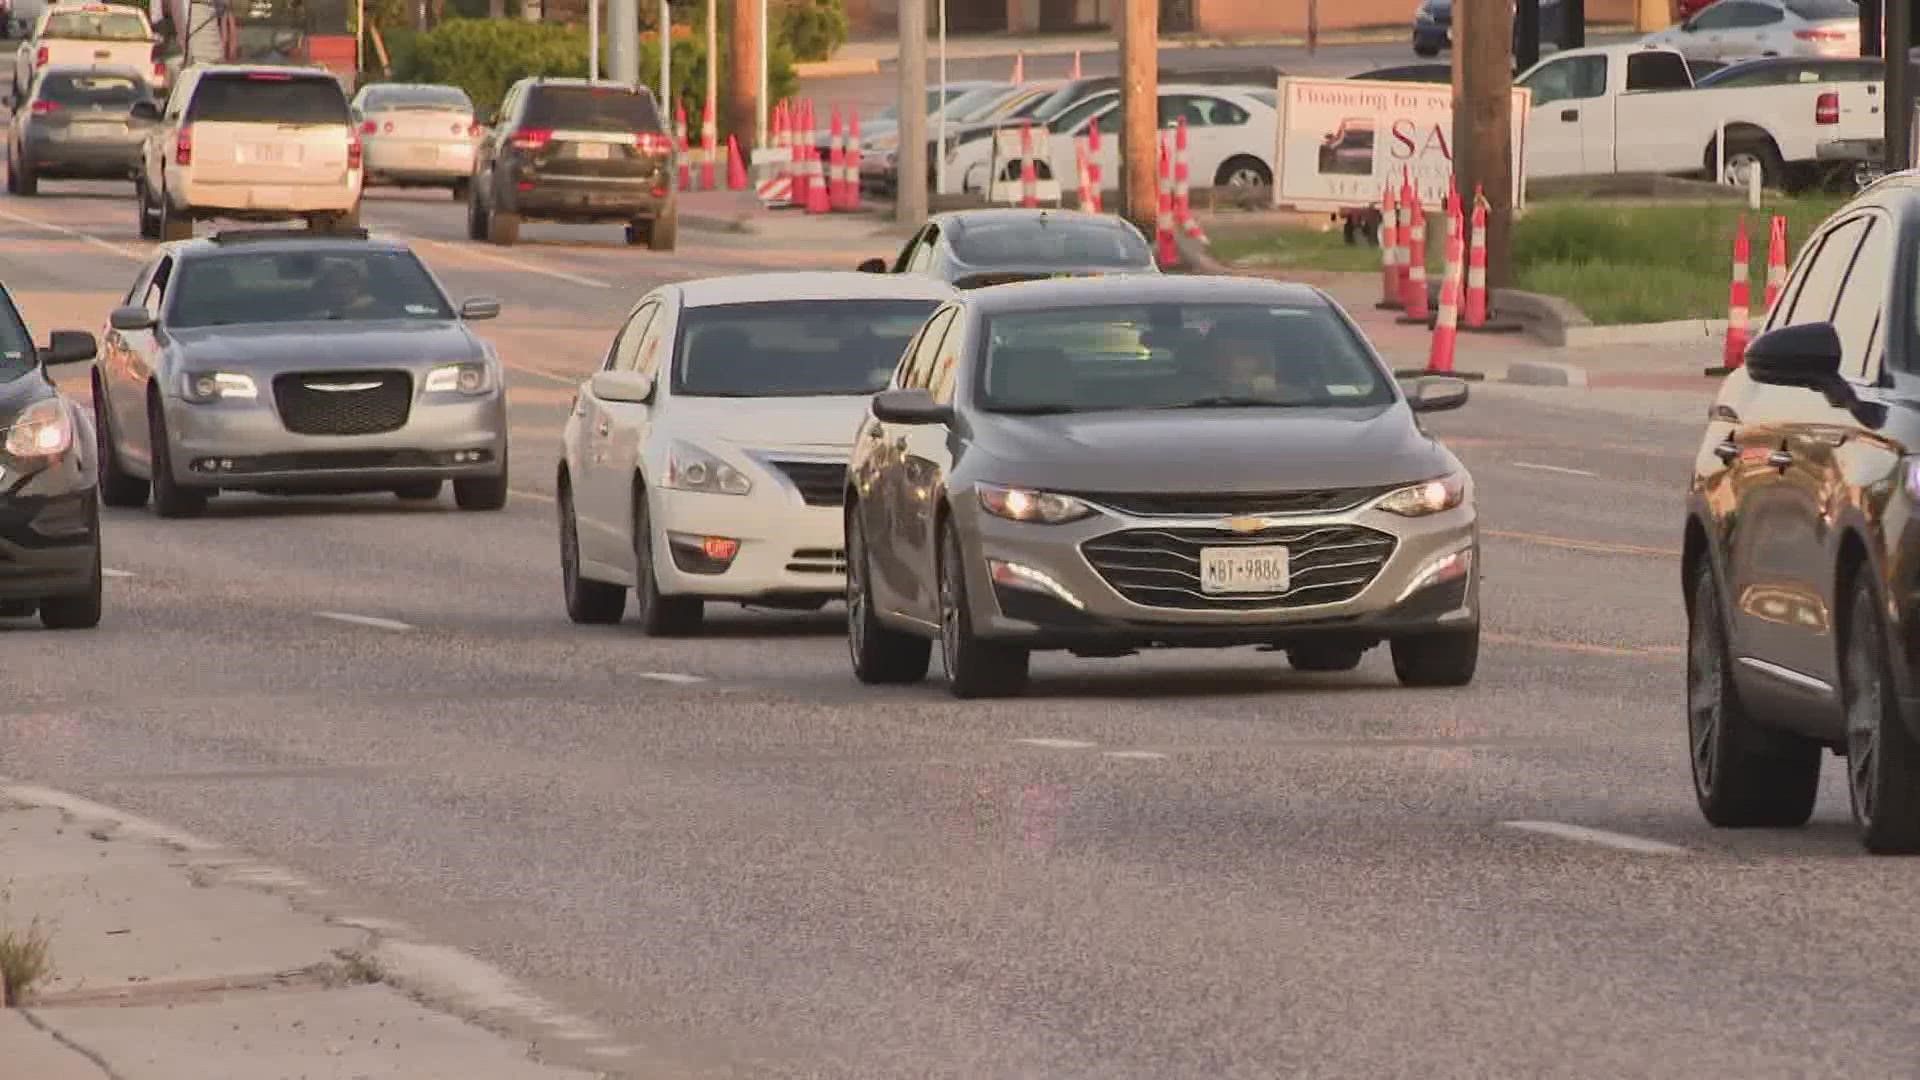 The man was trying to cross St. Charles Rock road near Dehart lane. The hit and run happened just after 9 p.m. last night.